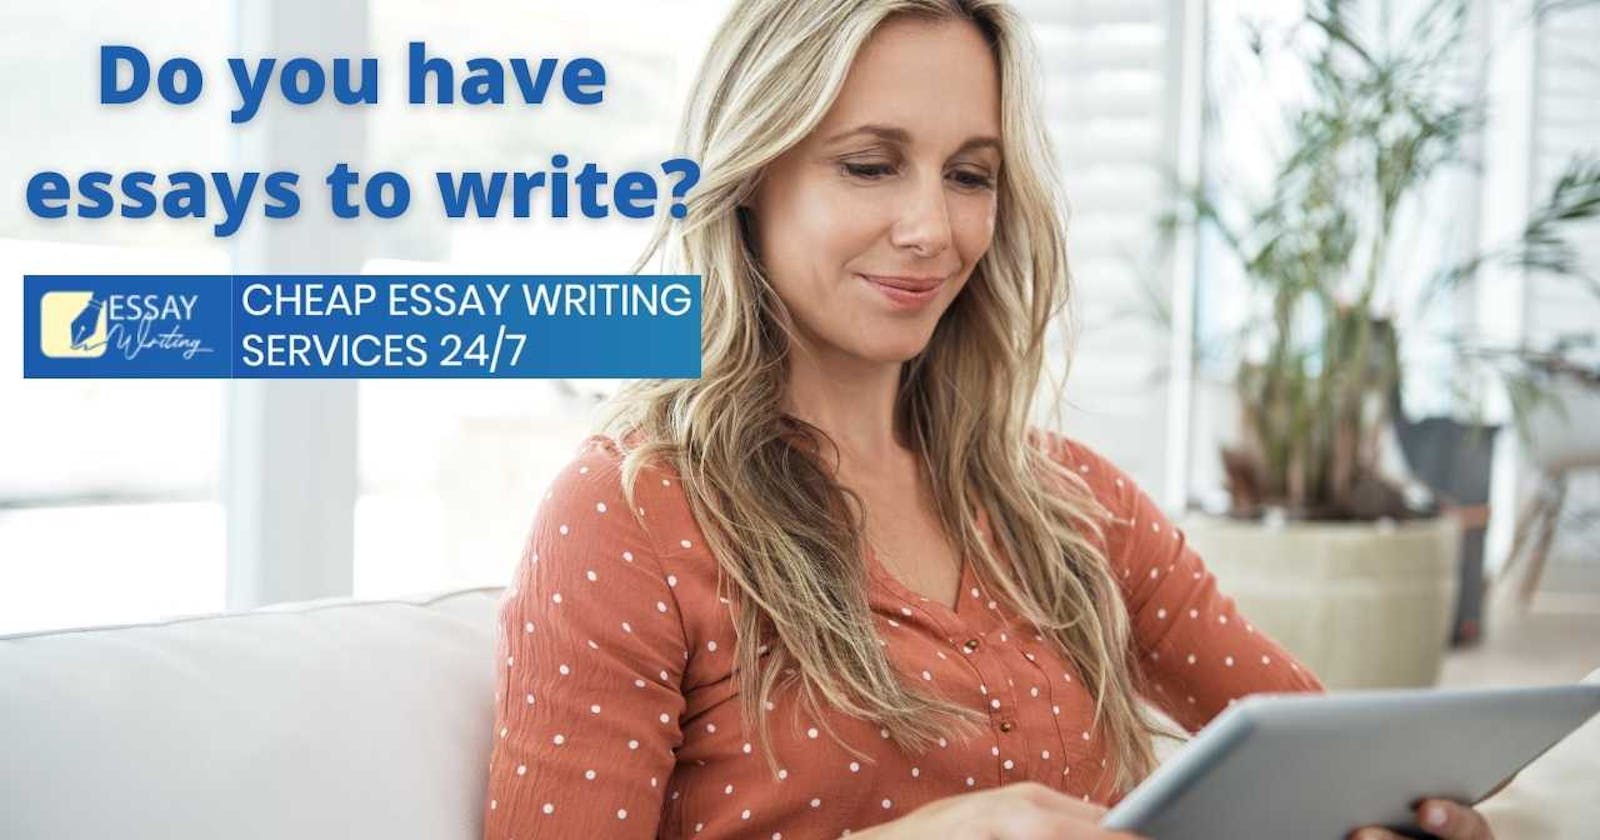 History essays: how to write